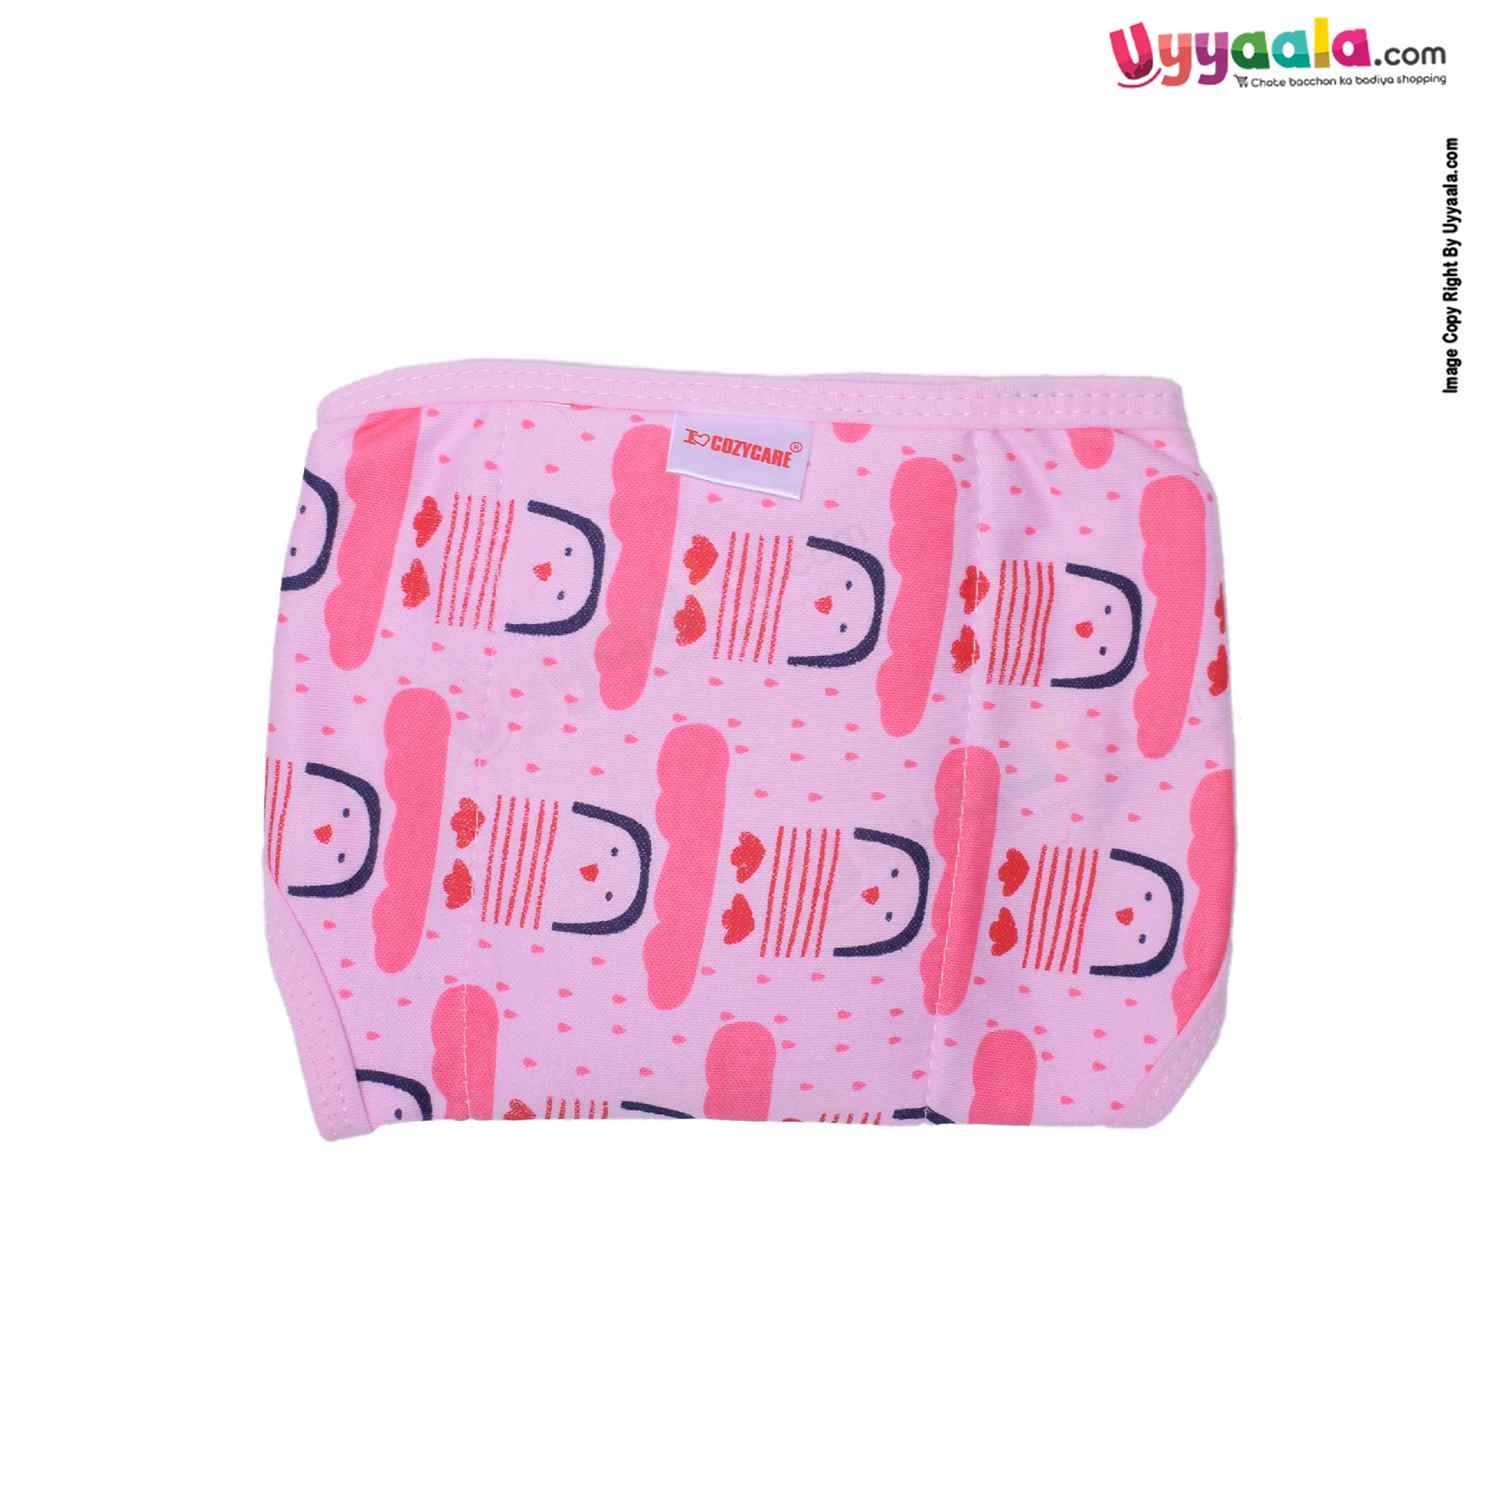 COZYCARE Washable Diapers Hosiery Velcro Penguin Print Blue, Pink & Animal Print Green 3P Set (SS)